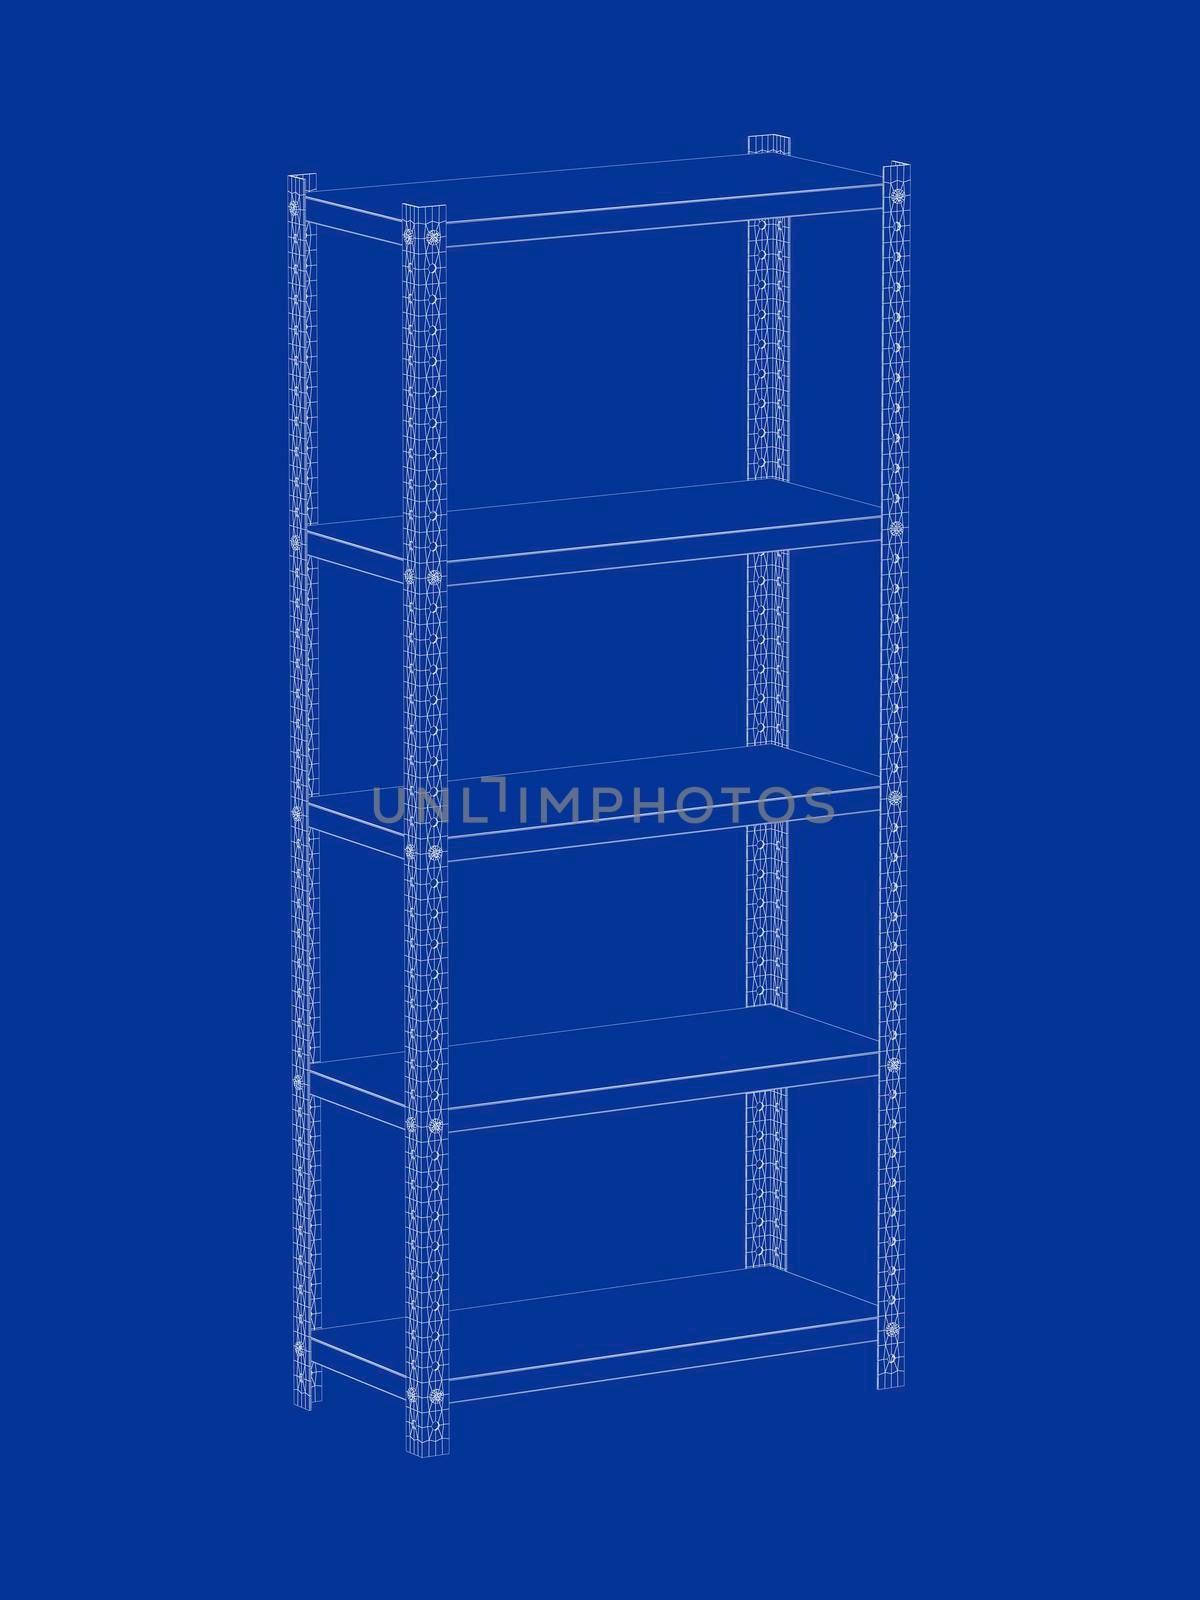 3D model of metal shelving unit
 by magraphics